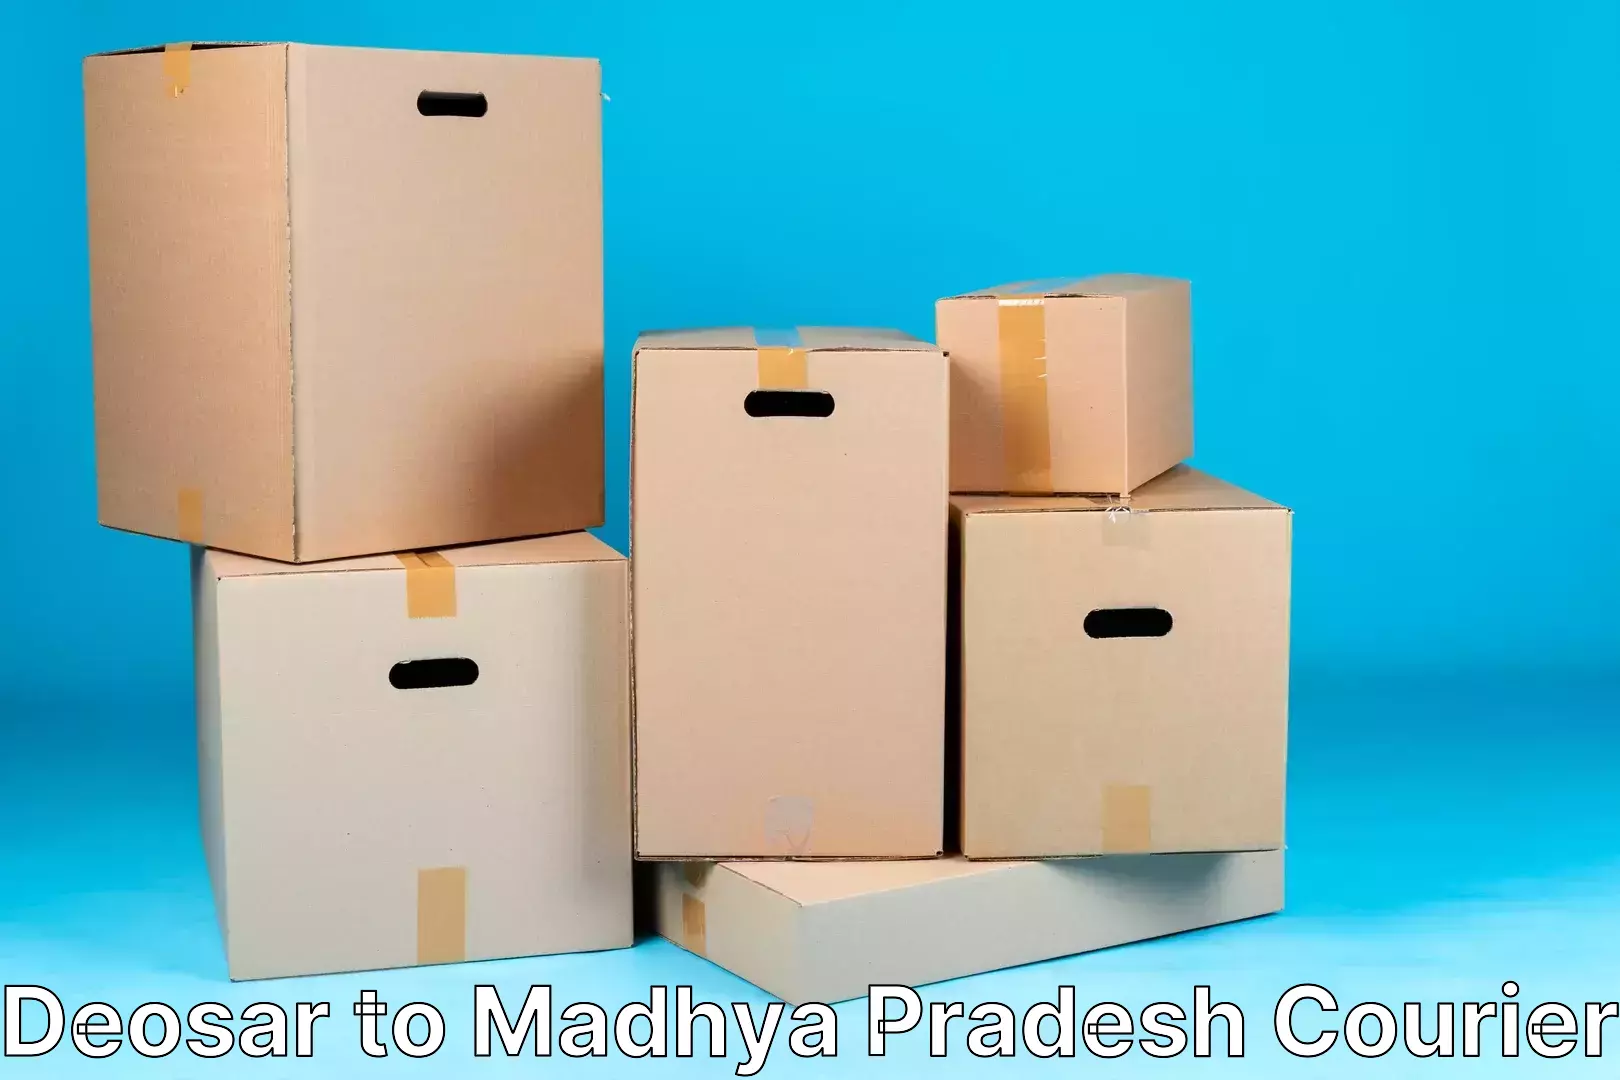 Global freight services Deosar to Madhya Pradesh